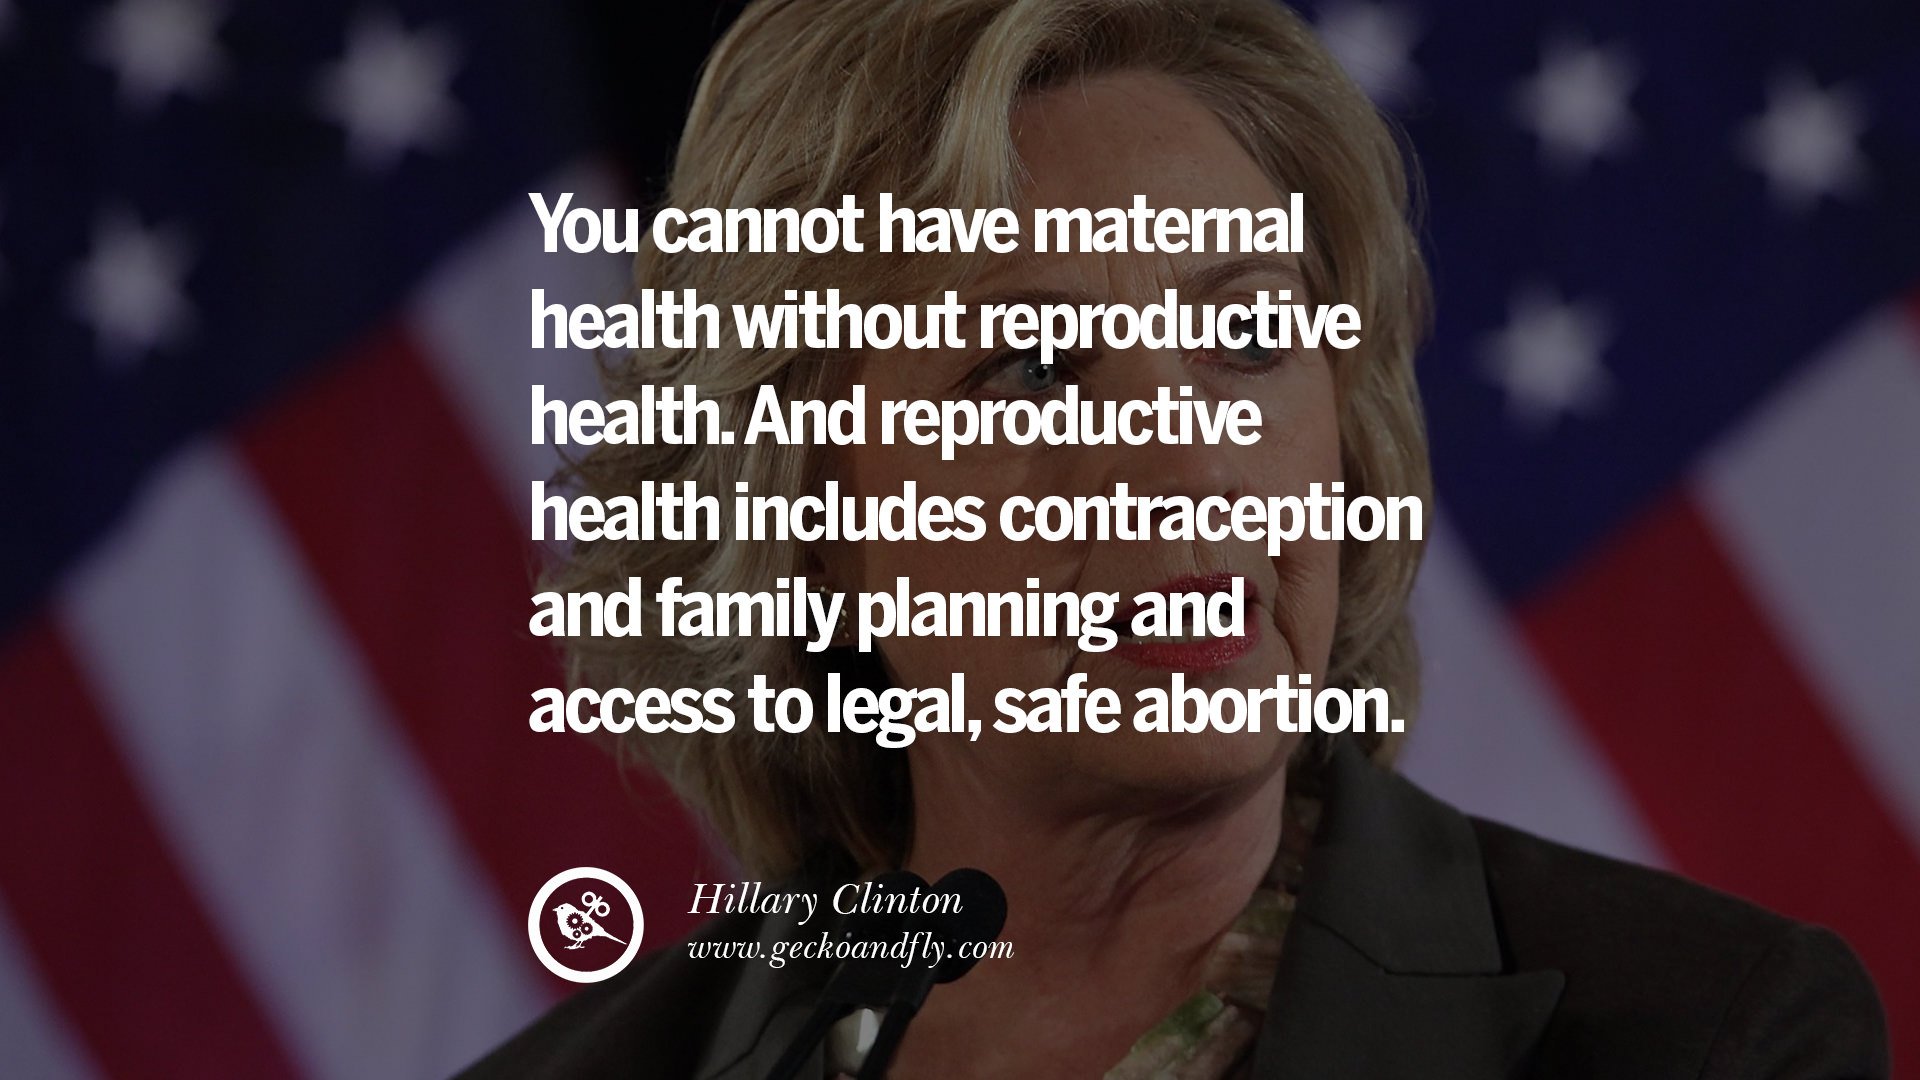 32 Hillary Clinton Quotes On Gay Rights, Immigration, Women And Health